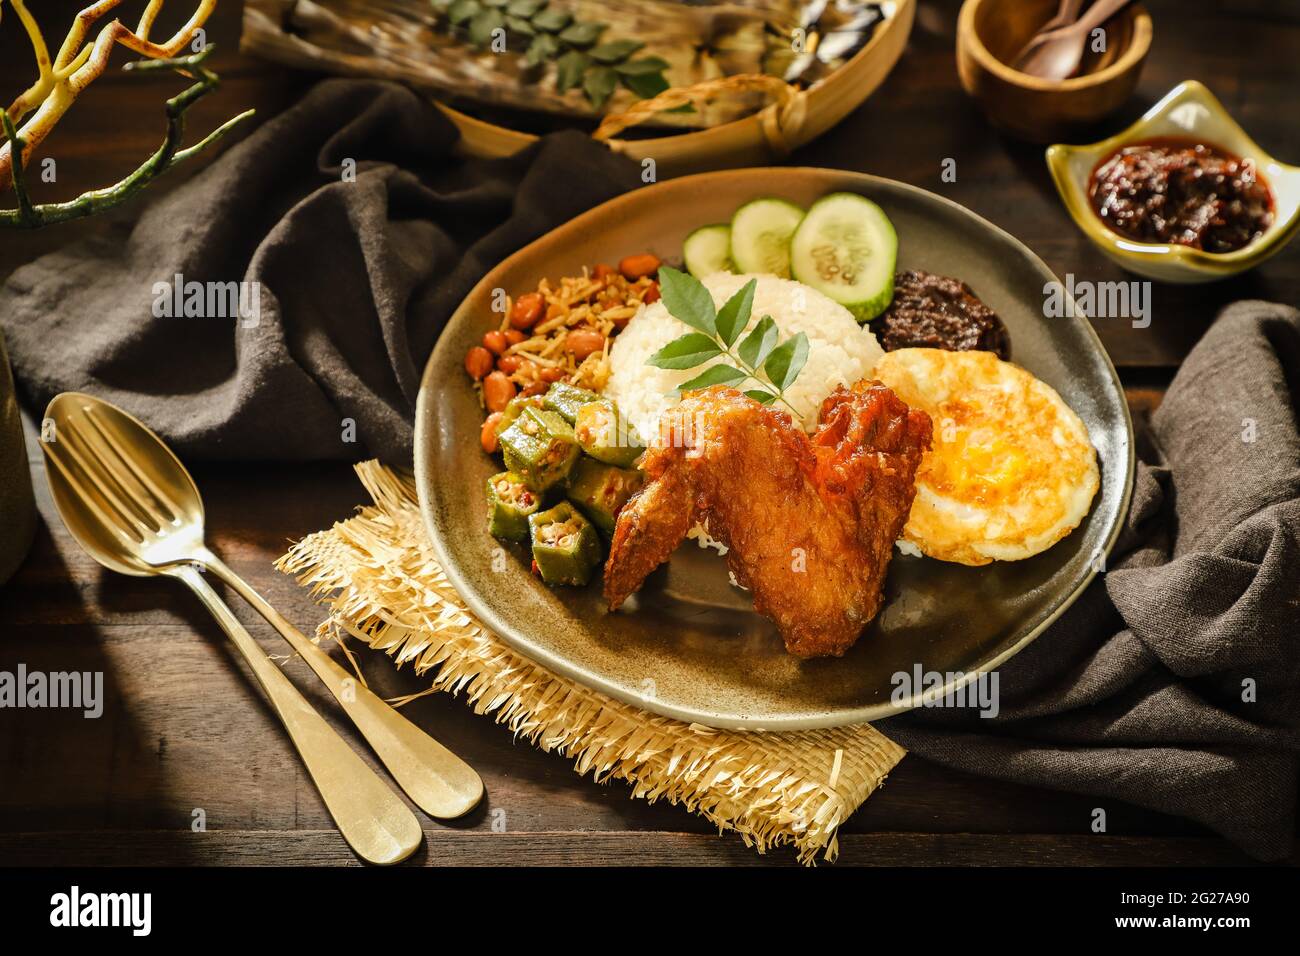 Nasi Lemak. Malay rice dish of fragrant rice with fried chicken, chili paste, peanuts, anchovies, egg. Stock Photo